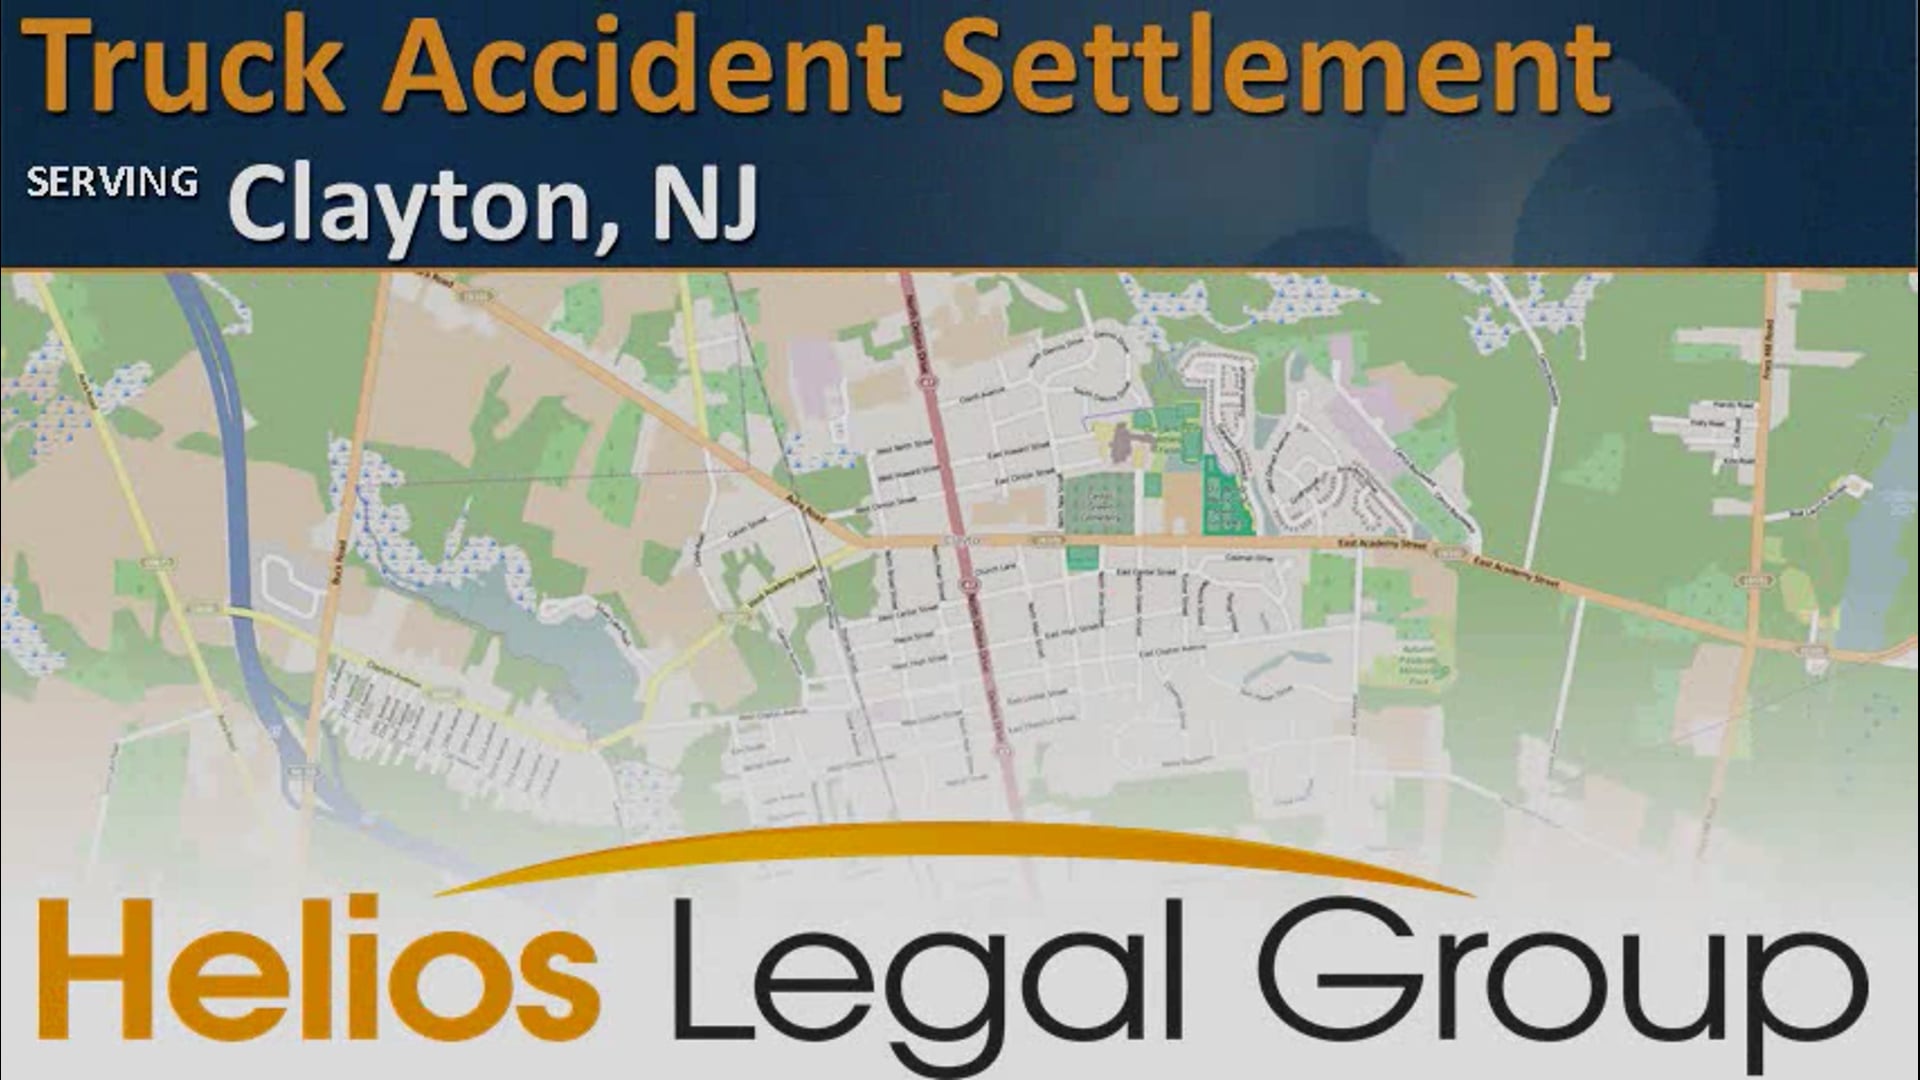 Truck Accident Settlement in Clayton, New Jersey